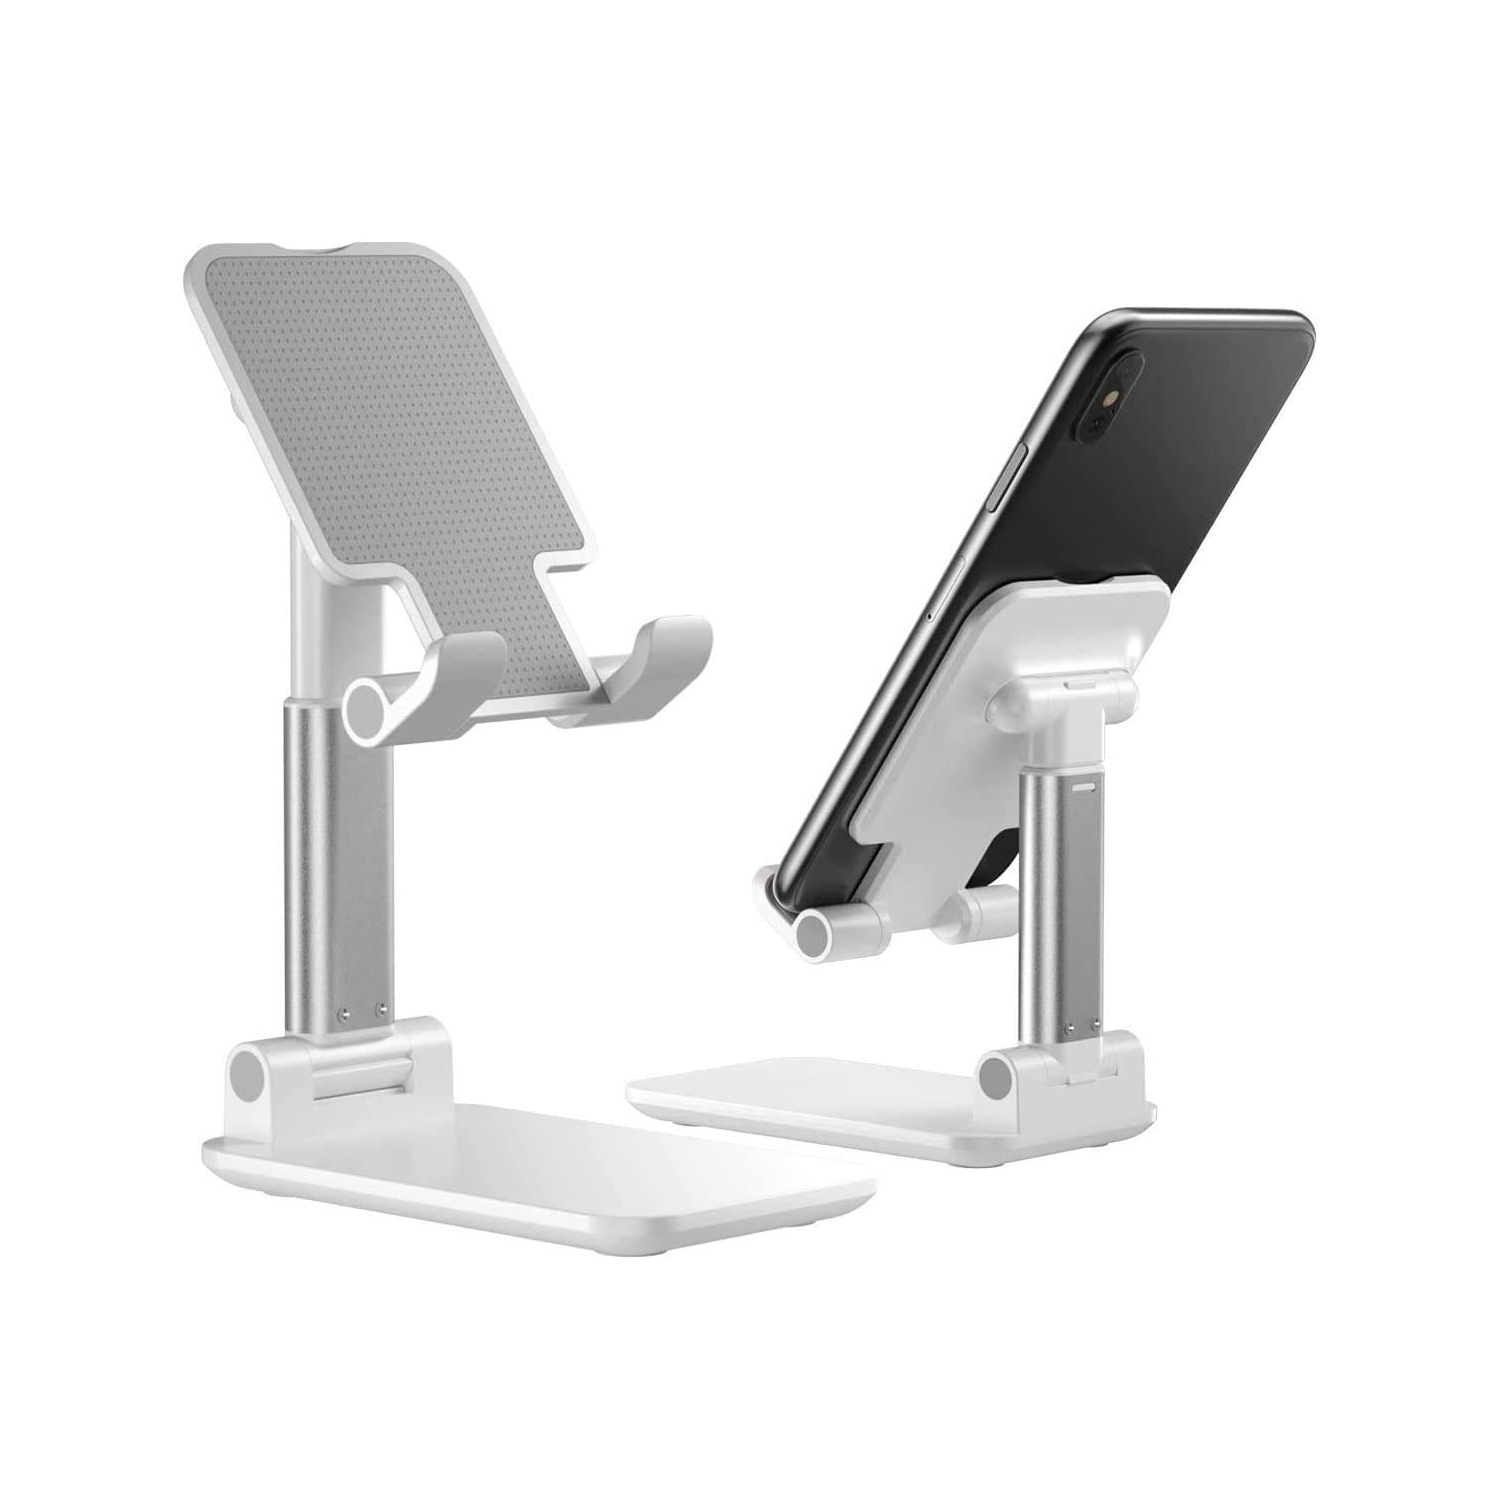 Wingomart- Cell Phone Stand, tablet holder Foldable Portable Desktop Stand Adjustable Height and Angle Phone Holder Aluminum Metal Stand Compatible with iPhone/samsung/huawei/iPad/Kindle